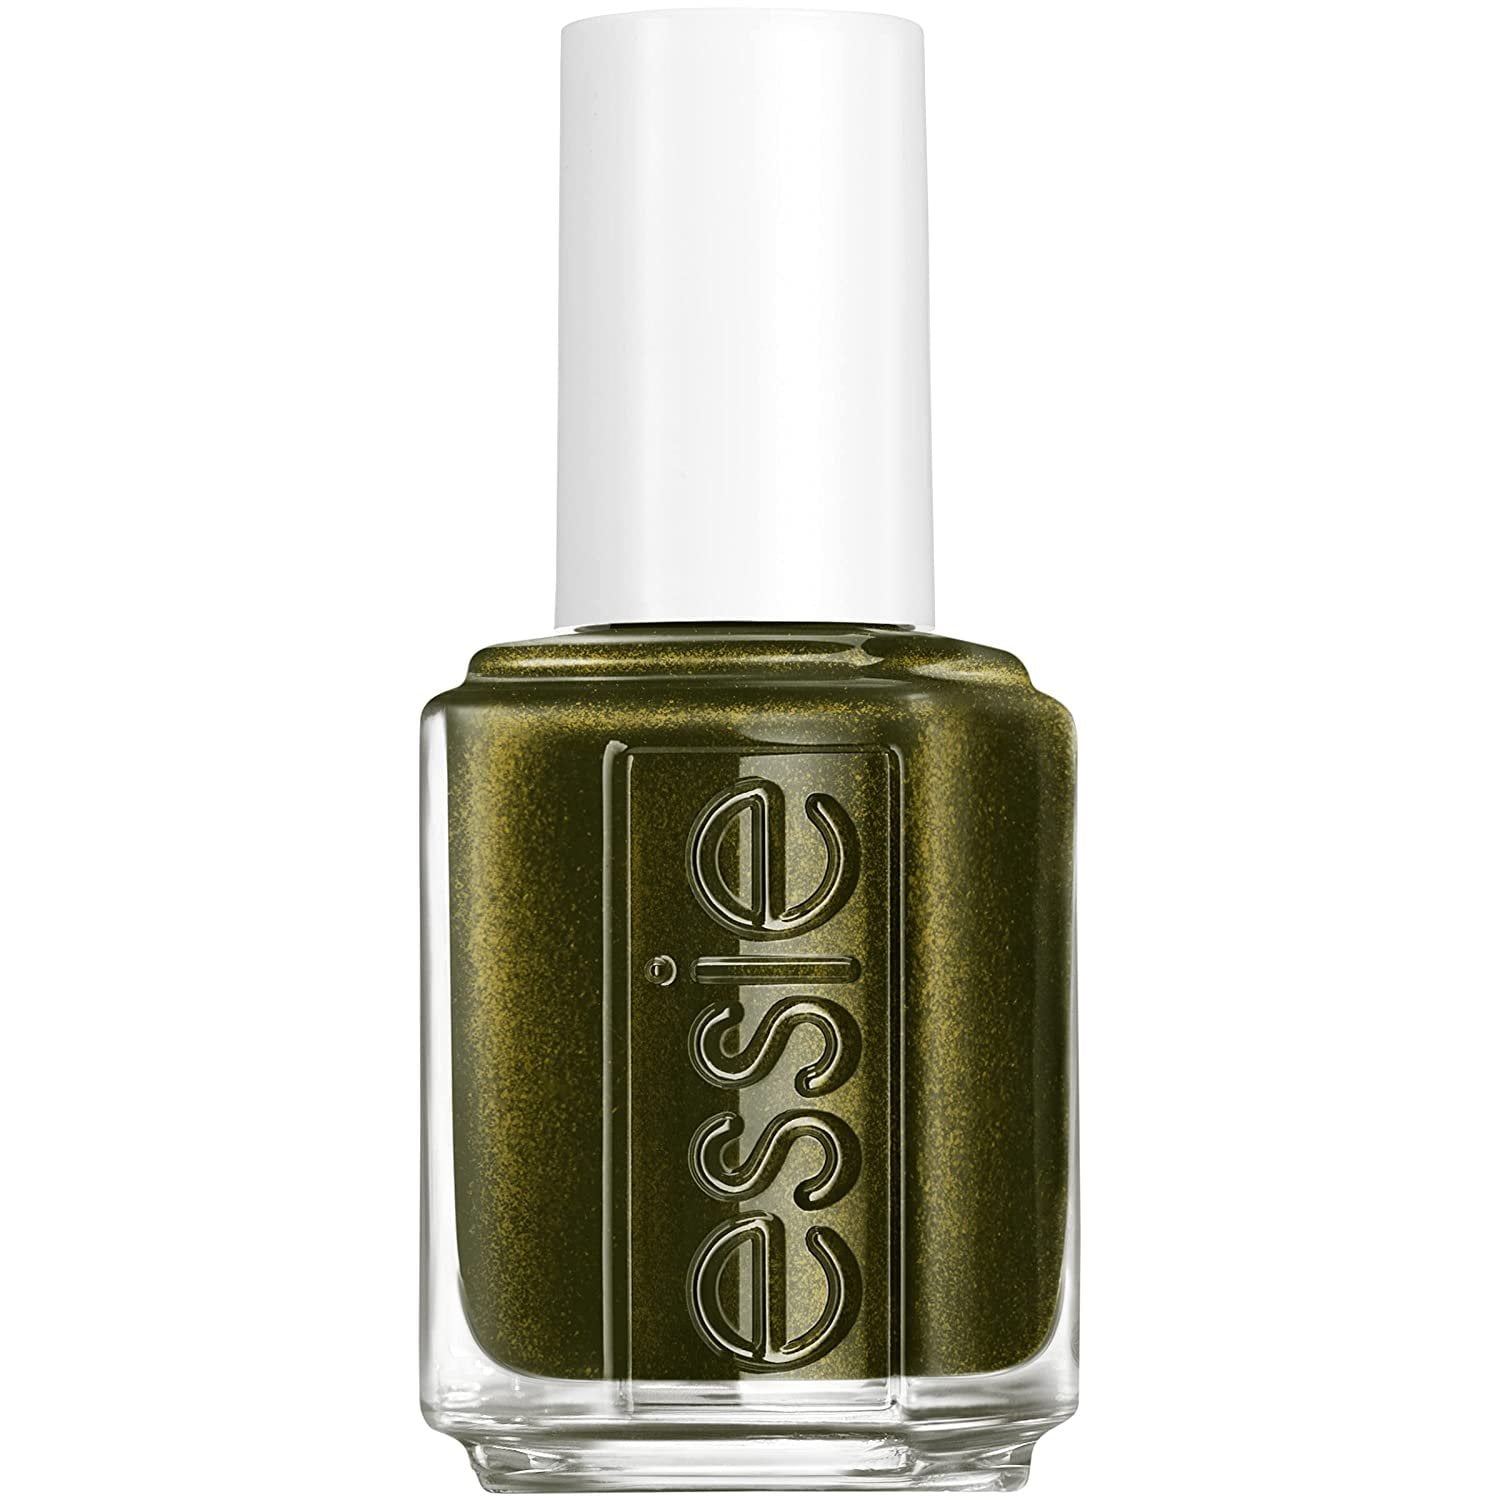 drijvend Supplement blok Essie essie nail polish, limited edition fall 2021 collection, warm onyx  green nail color with a shimmer finish, high voltage vinyl, 0.46 fl. oz. -  Walmart.com